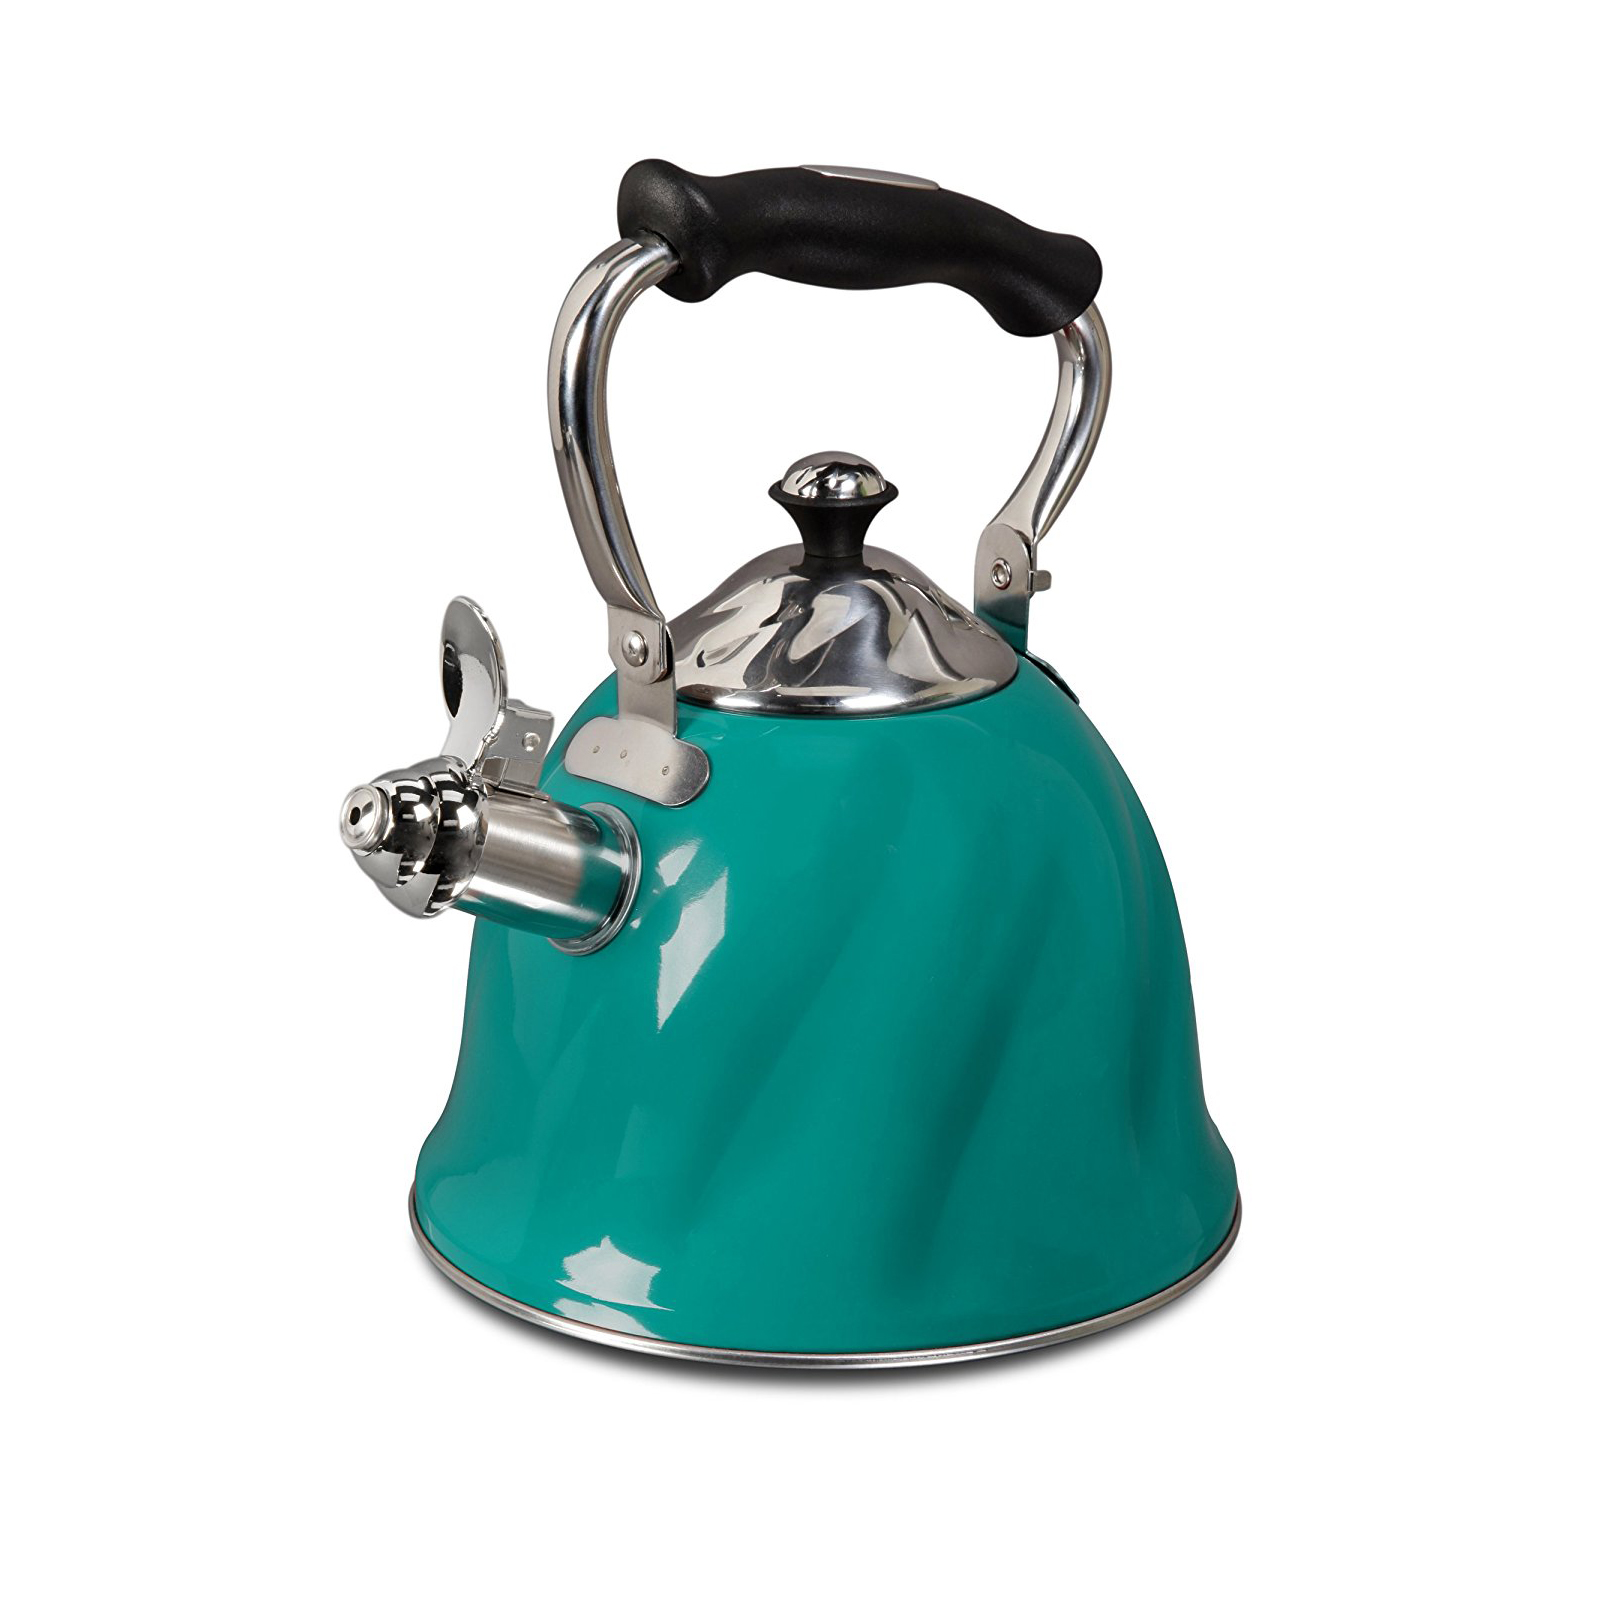 Mr. Coffee 97086570M Alberton 2.3 Qt. Tea Kettle with Lid- SS Emerald Green Color Painted